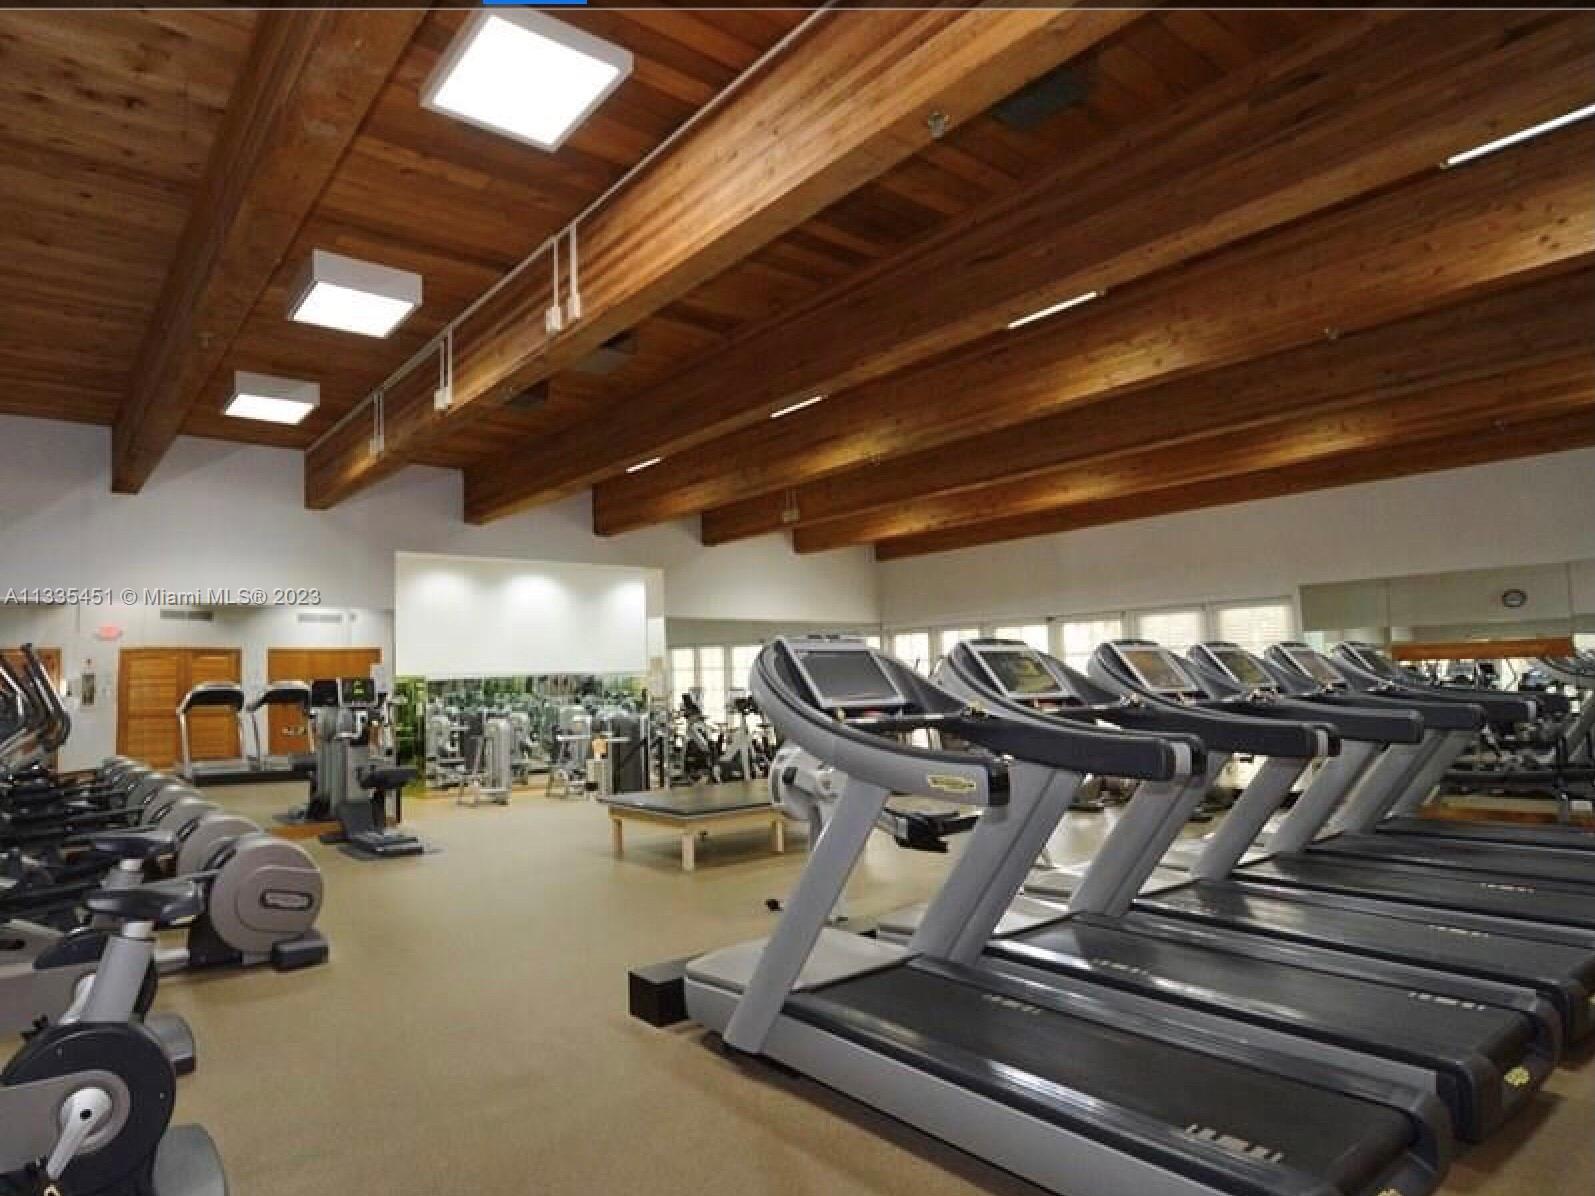 Full Gym with Cardio, machines, and weight rooms